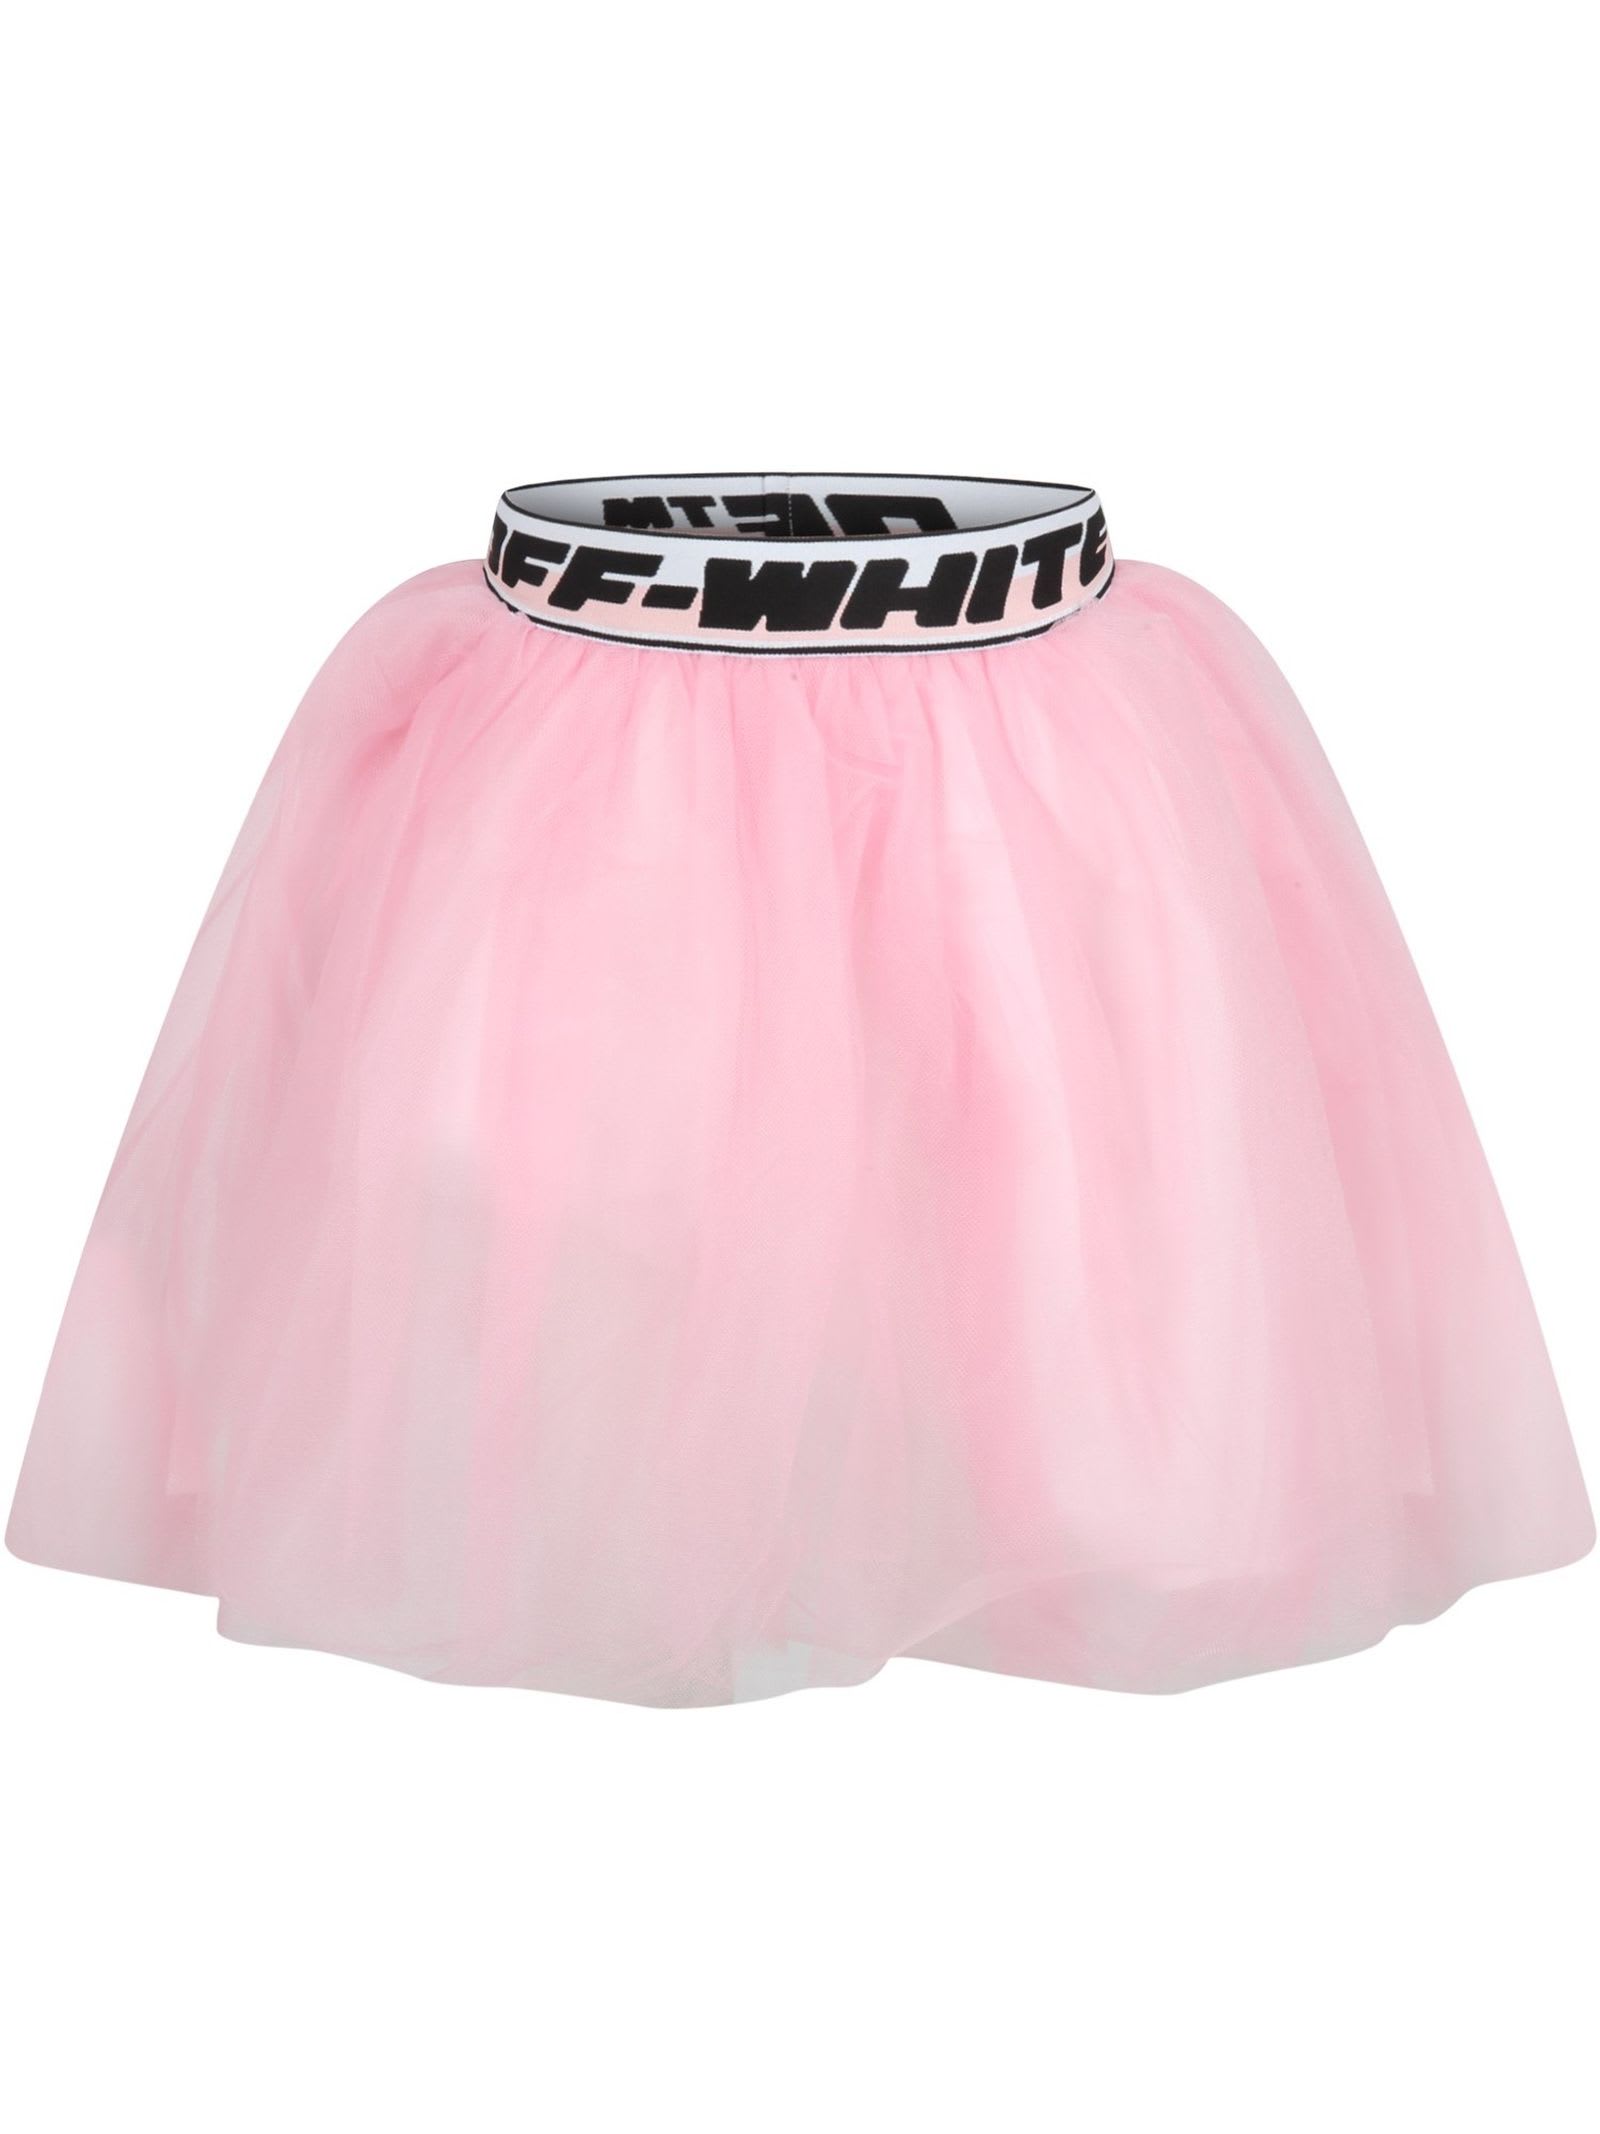 Off-White Skirt In Pink Tulle Fabric